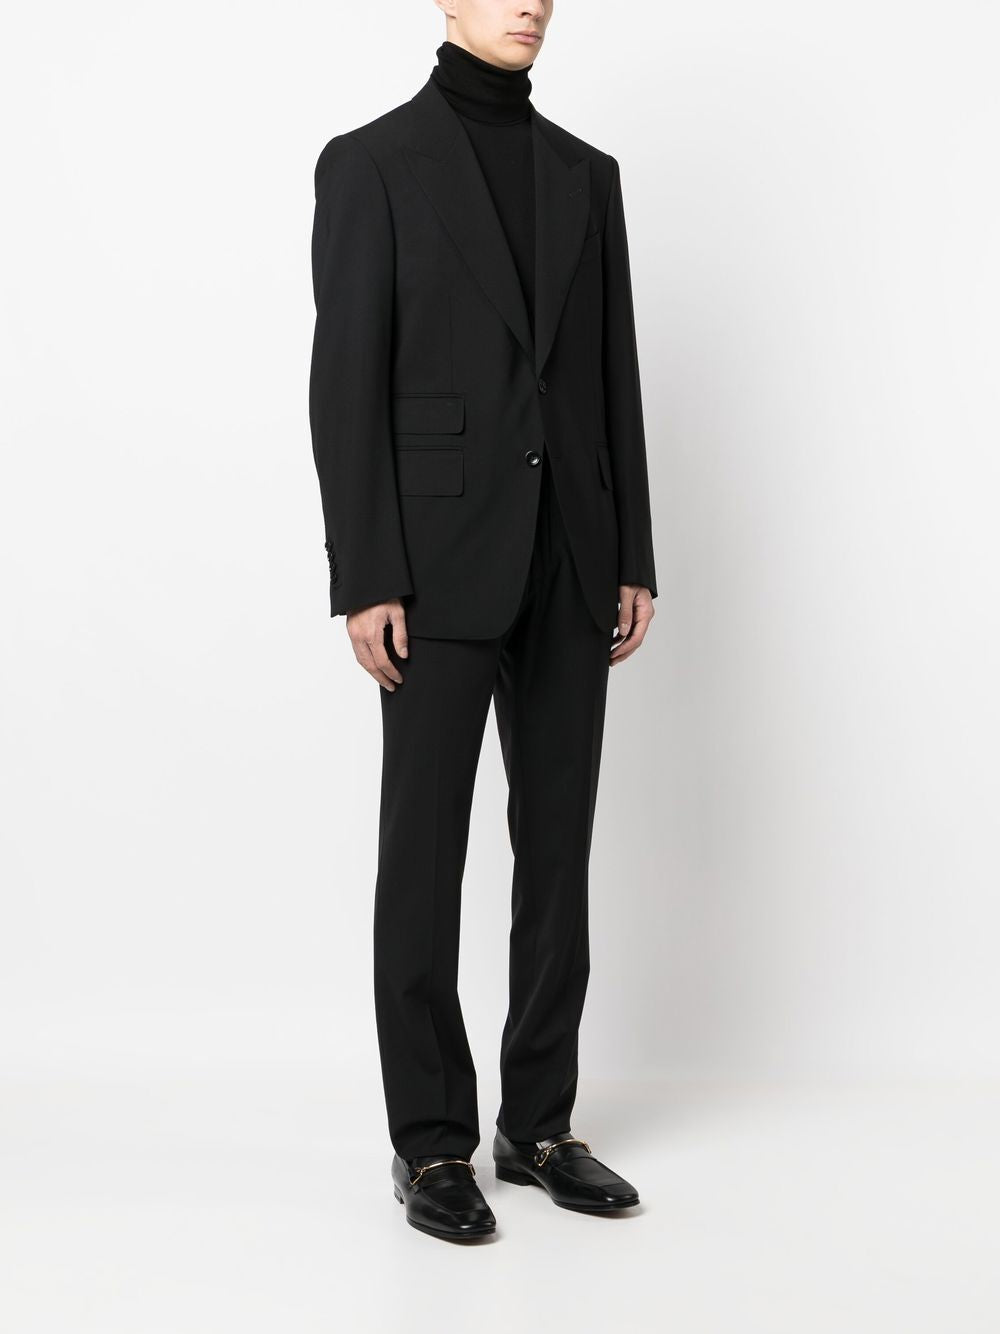 TOM FORD SINGLE BREASTED STRAIGHT LEG SUIT